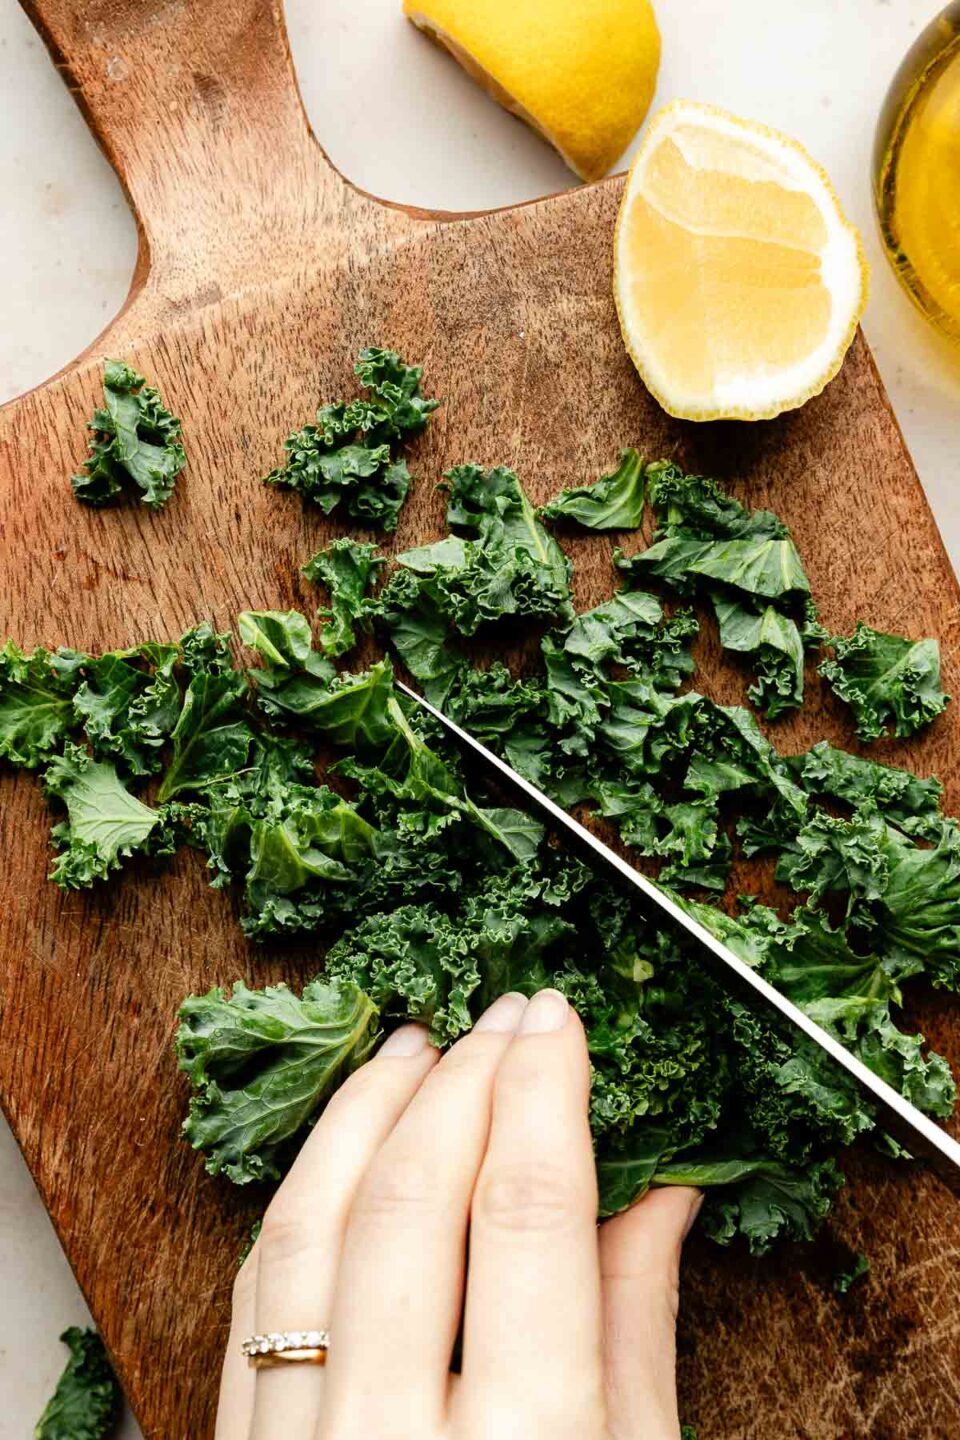 An overhead shot of a woman's hand holding kale and chopping it on a wooden board. Lemon wedges sit beside the kale.